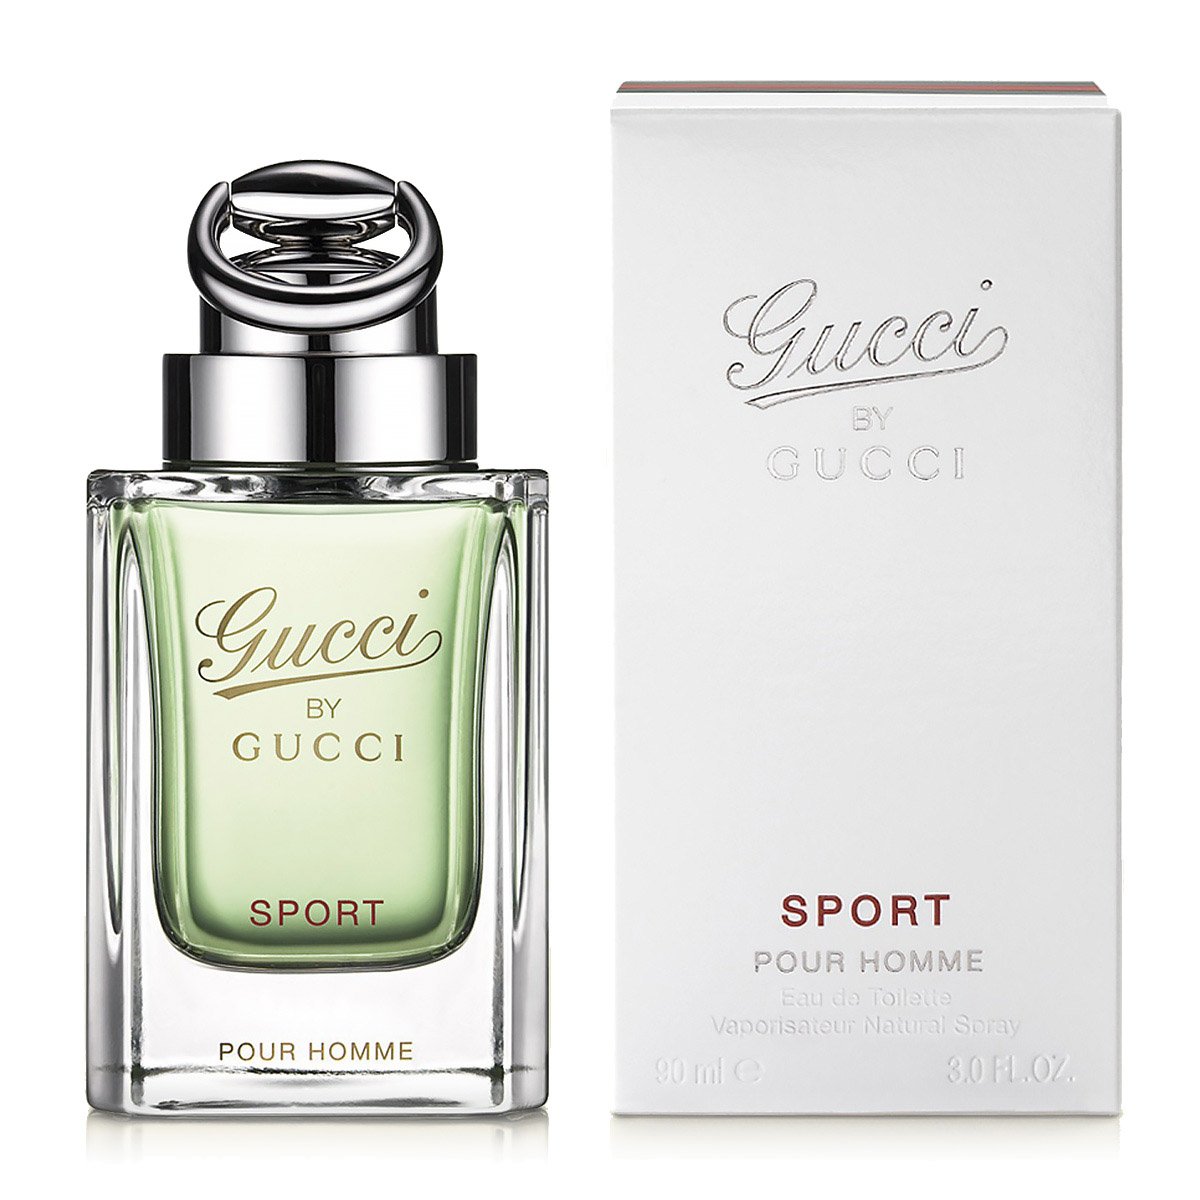 Туалетная вода gucci pour homme. Gucci by Gucci Sport pour homme (Gucci). Gucci by Gucci Sport. Gucci by Gucci Sport pour homme 90ml. Gucci by Gucci Sport 90 мл.